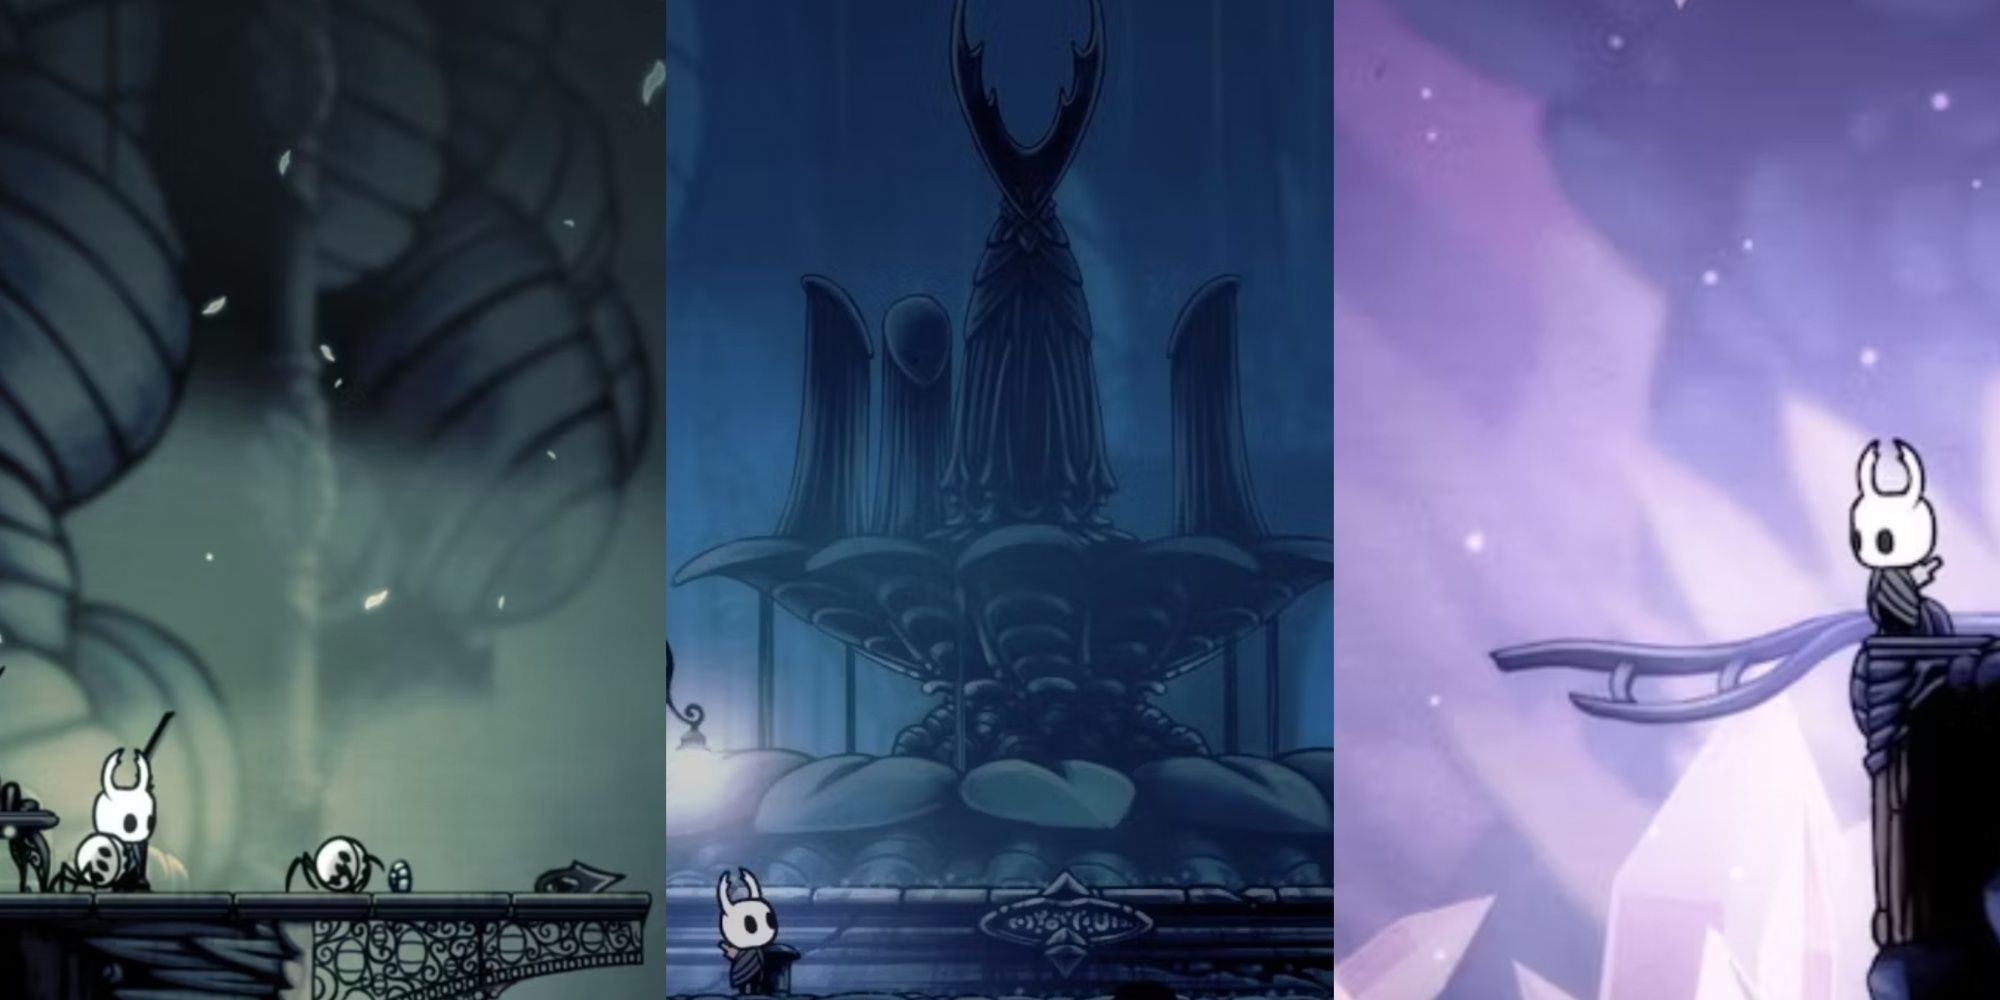 The Knight in Kingdom's Edge, City of Tears, and Crystal Peak in Hollow Knight